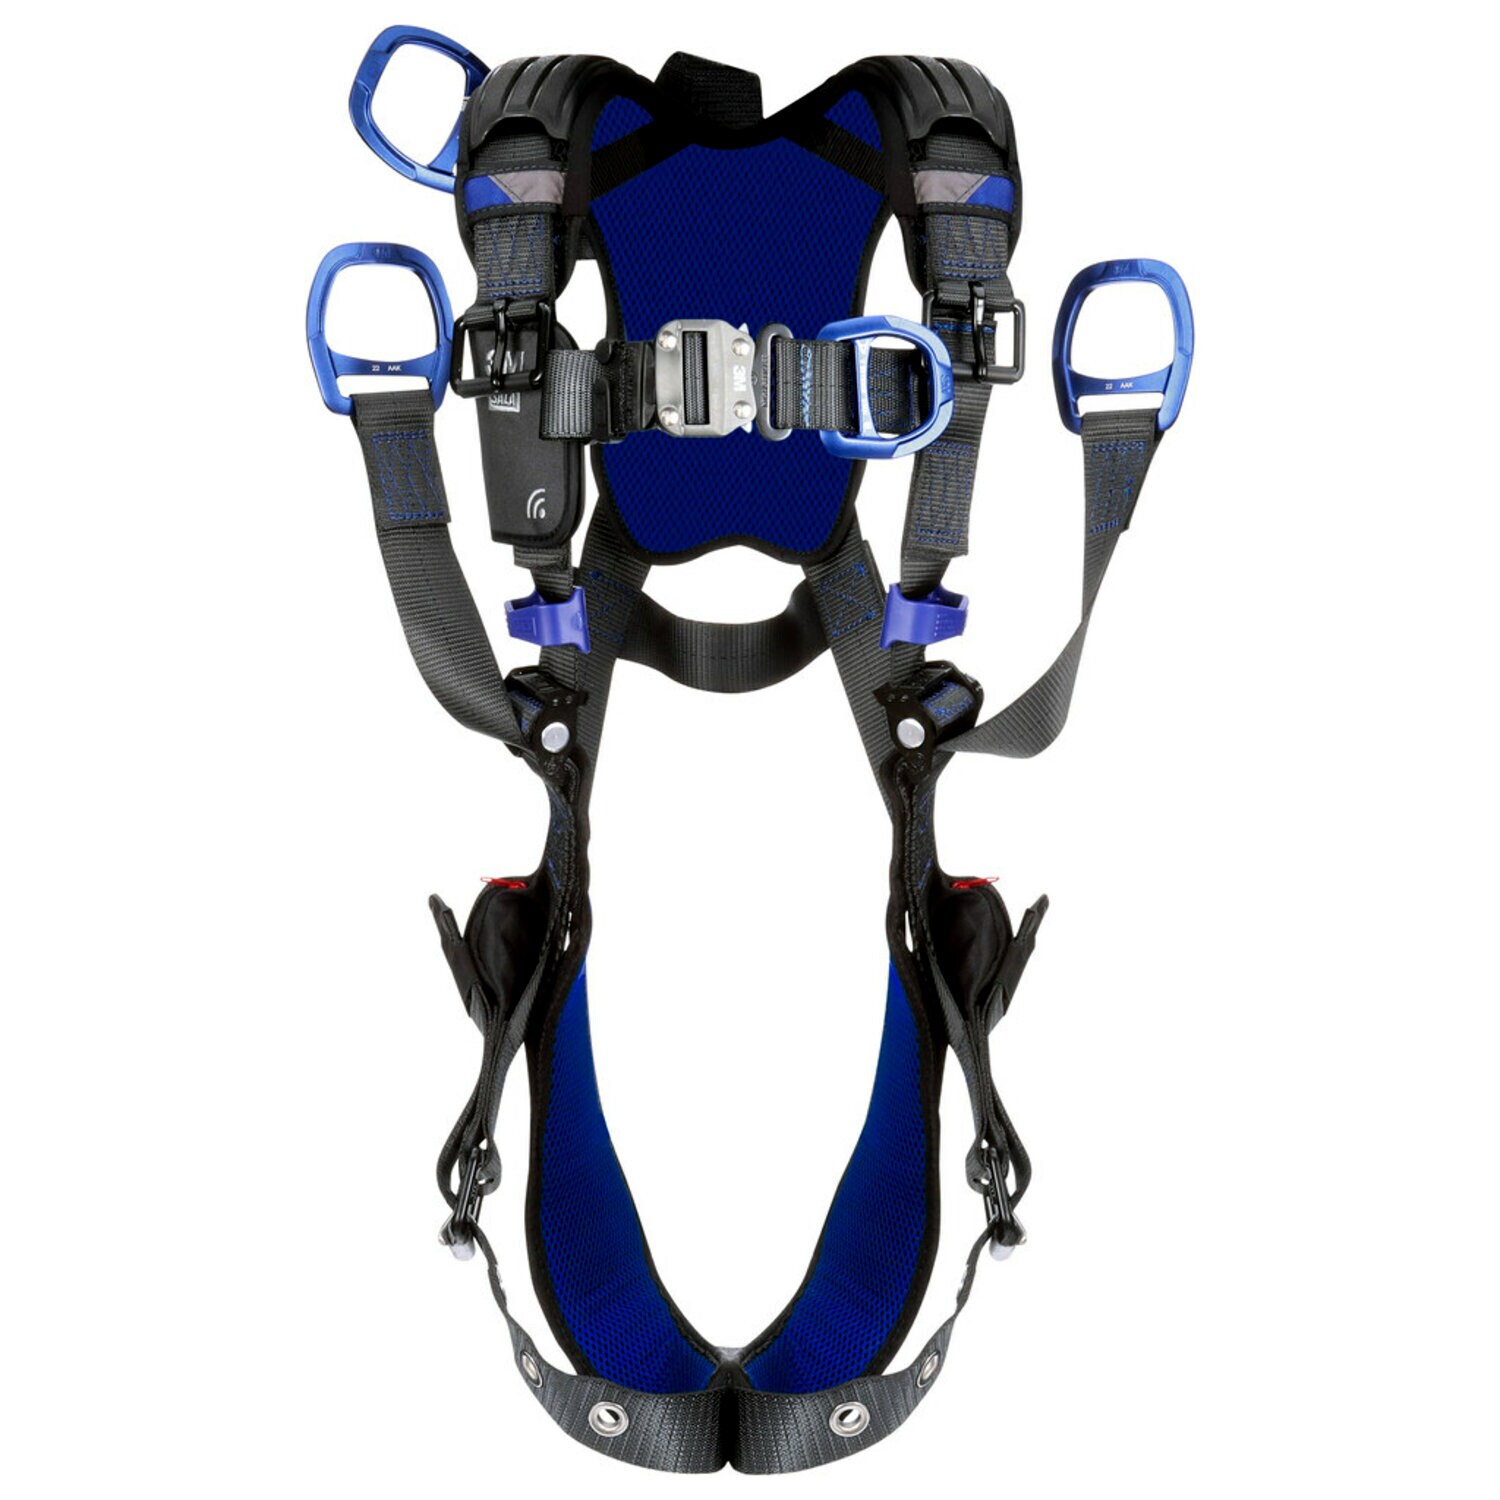 7012818053 - 3M DBI-SALA ExoFit X300 Comfort Oil and Gas Climbing/Lifting Safety Harness with Tongue Buckle Belt Connector 1403226, X-Large